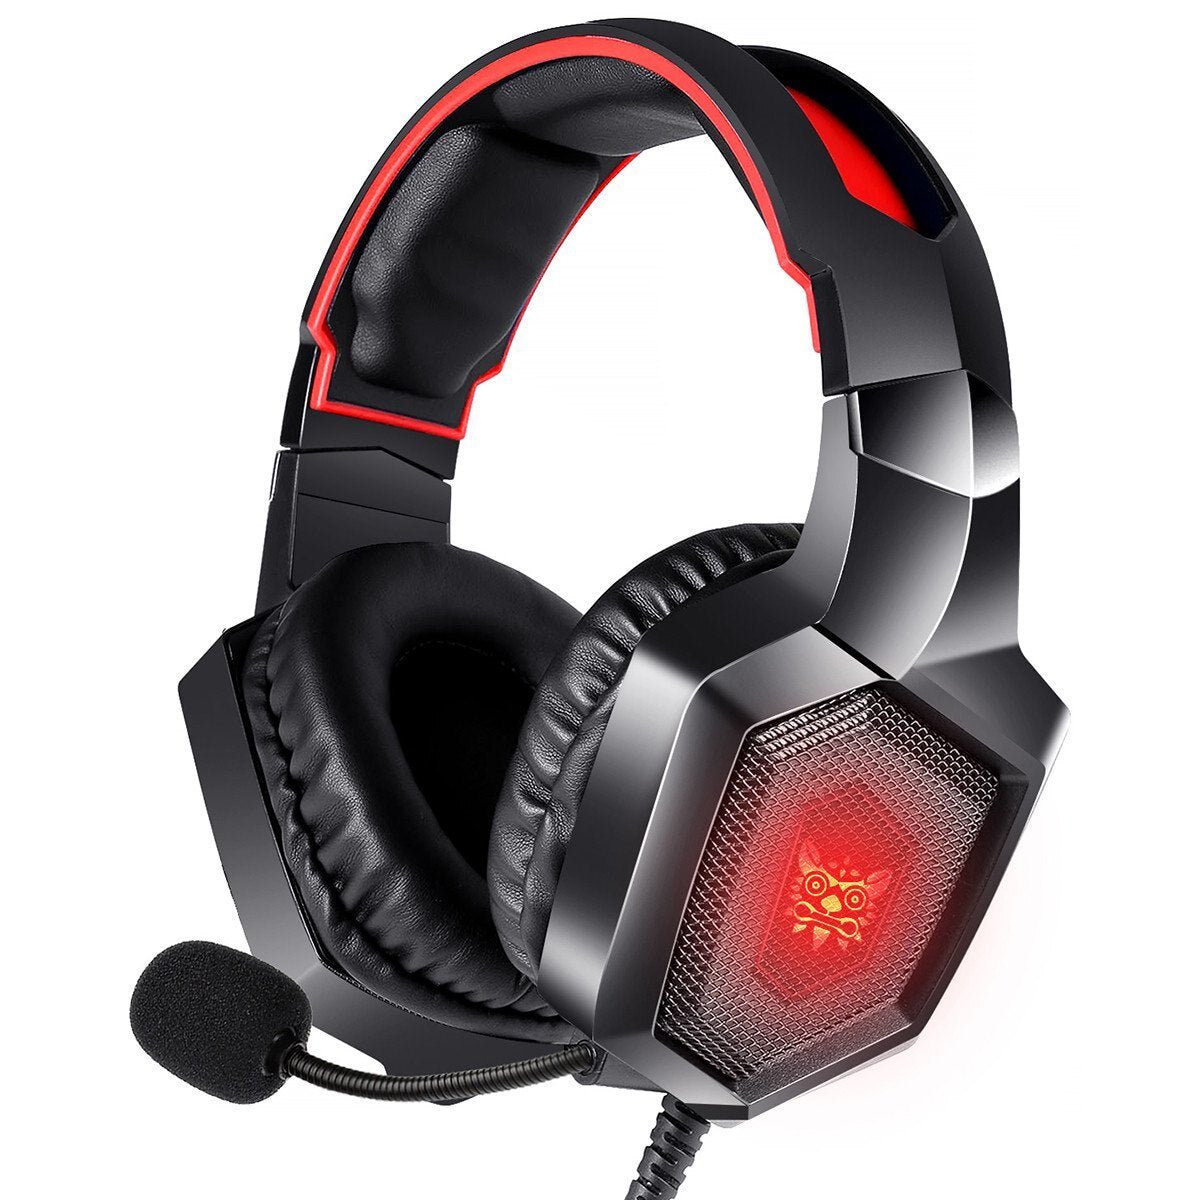 Wired LED Gaming Headset - Bargainwizz